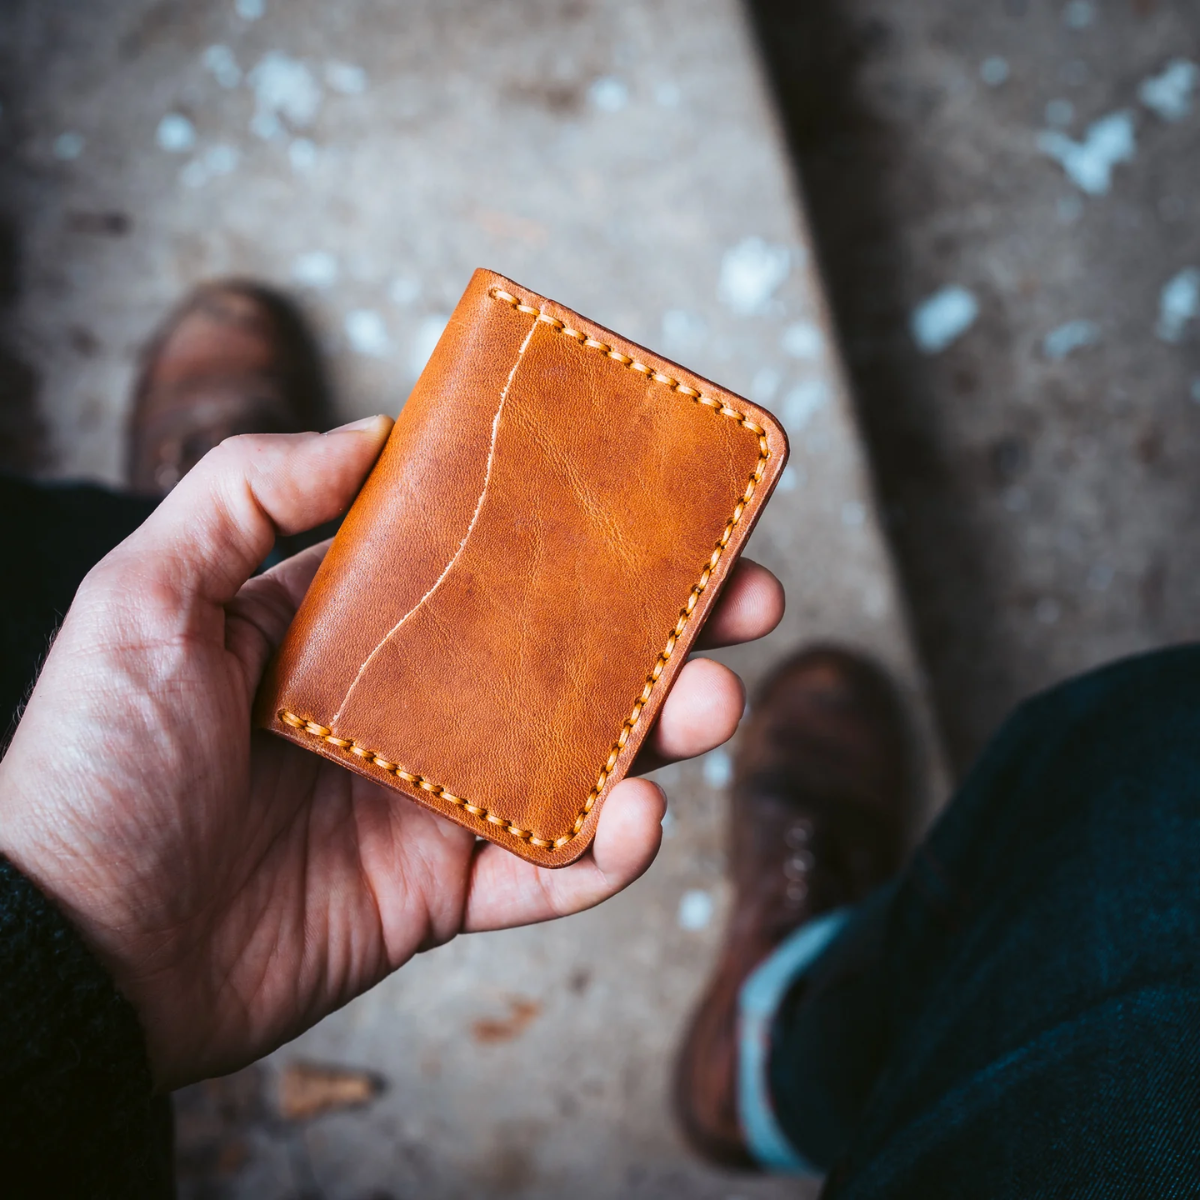 25. Handcrafted Leather Wallet: A Thoughtful and Unique Anniversary Gift for Him